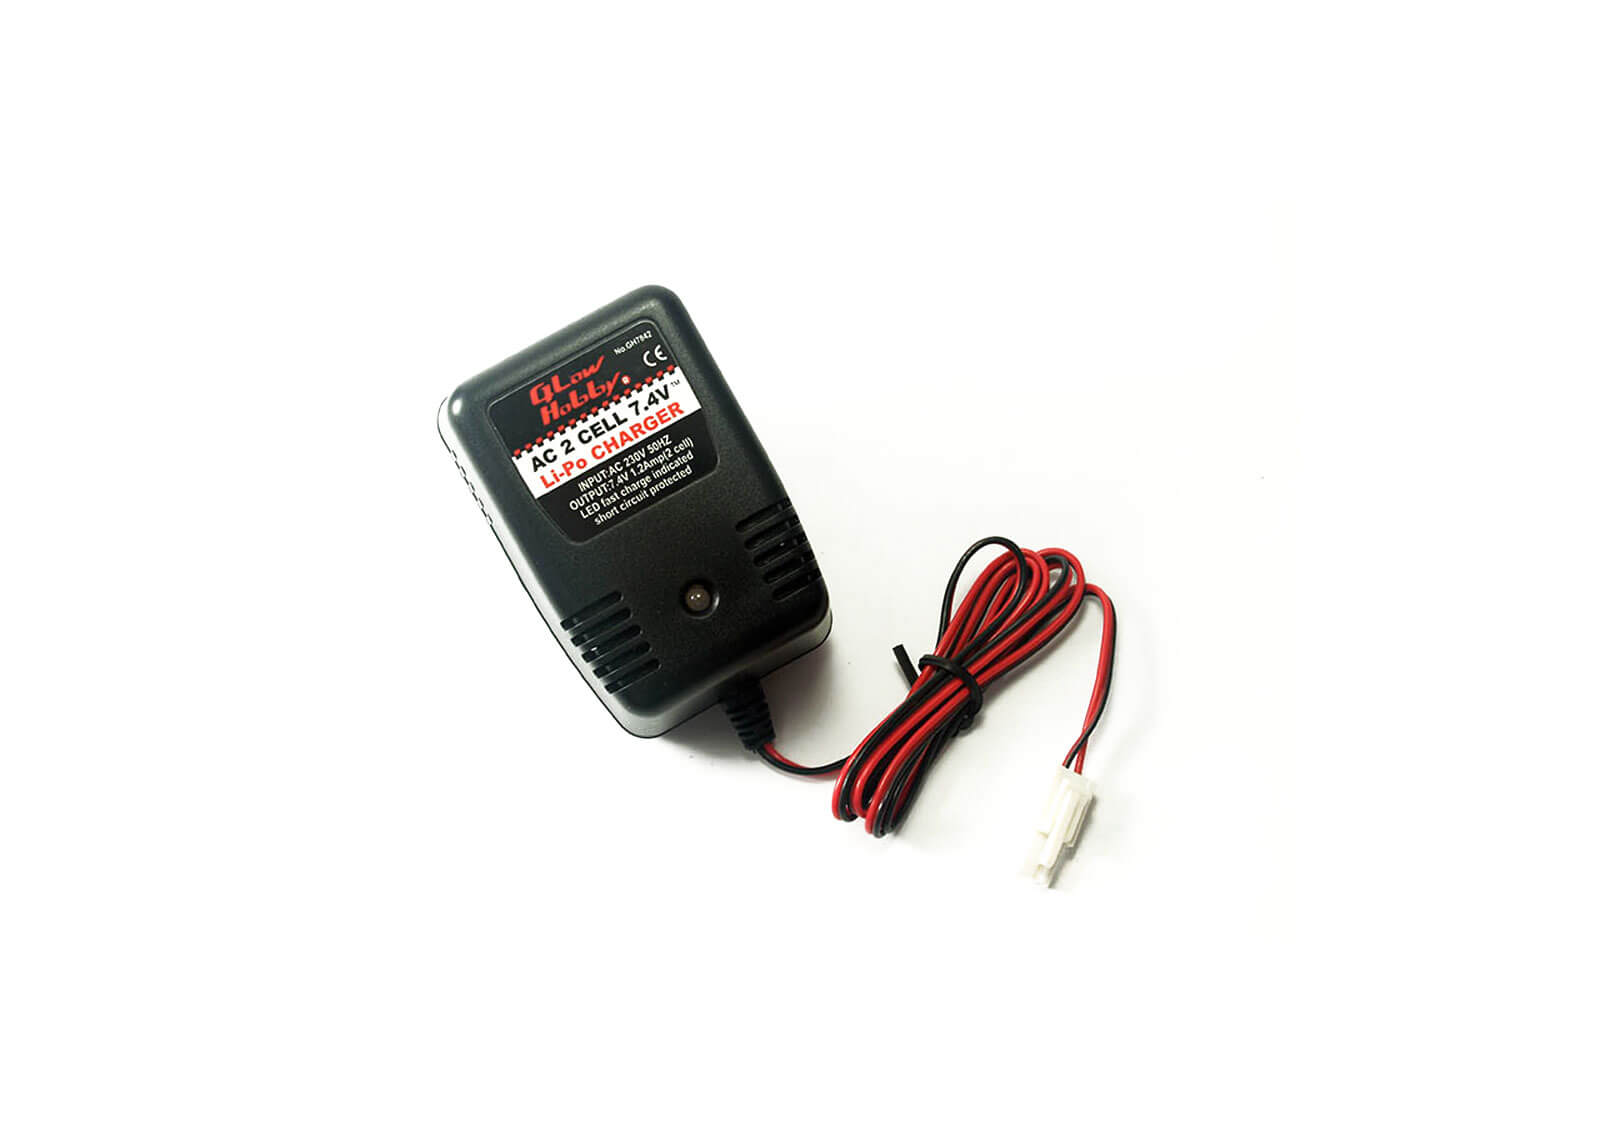 AC 2 CELL LI- POLYMER CHARGER/ 230V (EUR Type) - Modify Airsoft Accessories